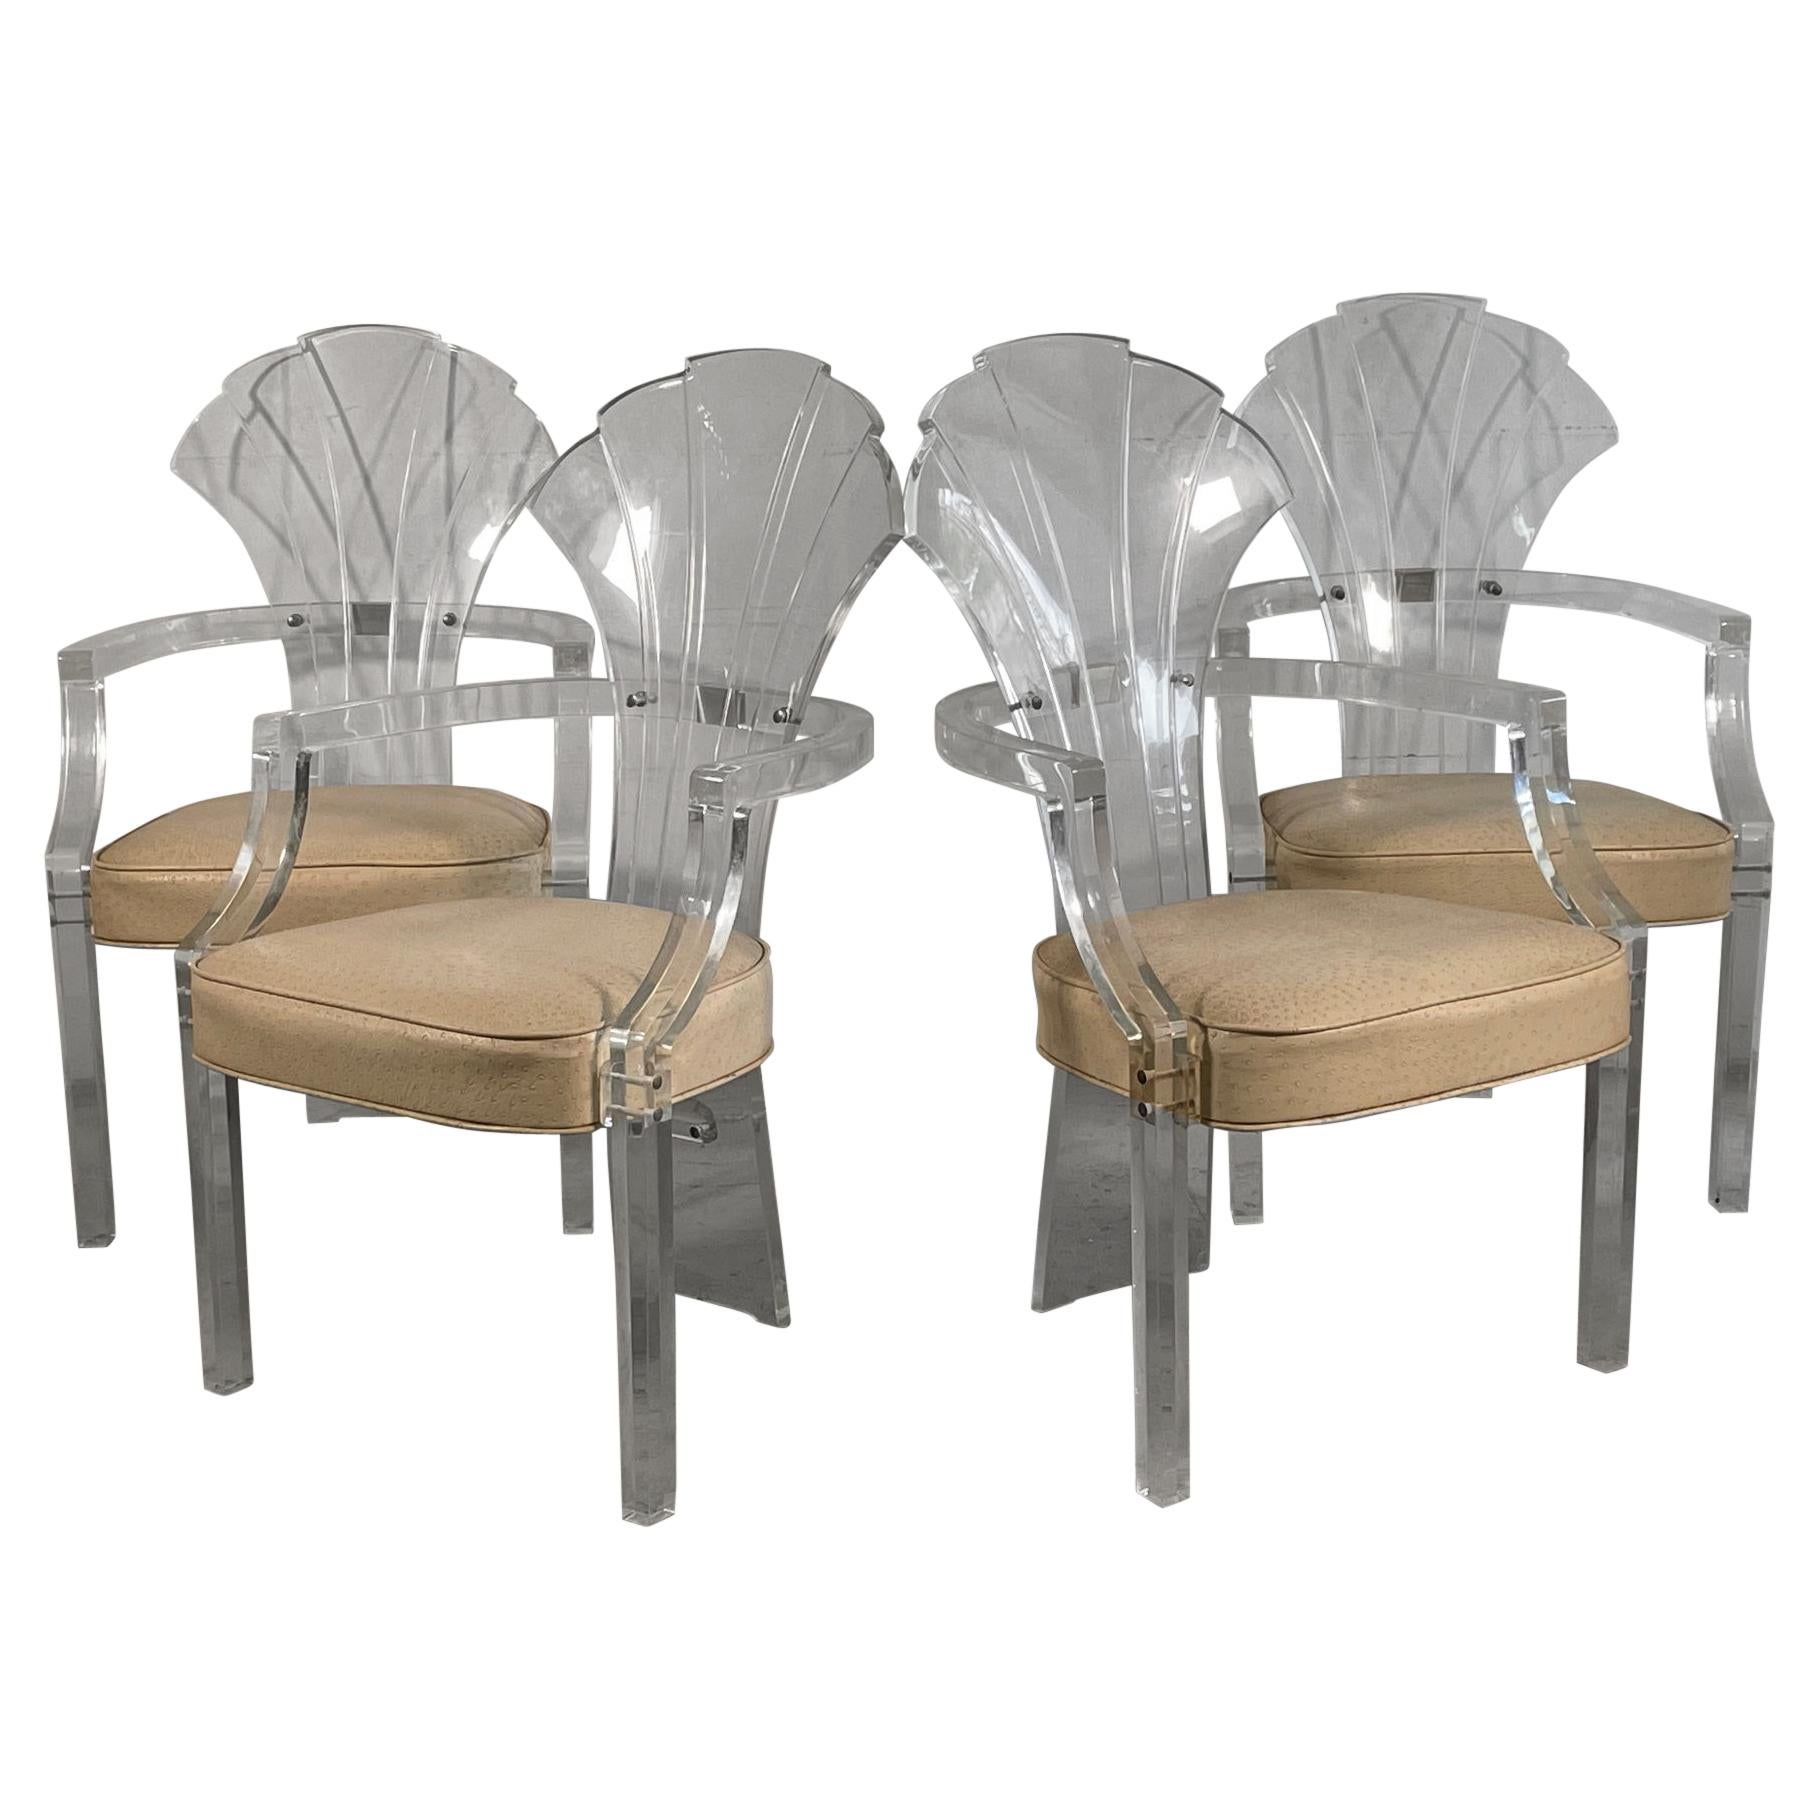 Lucite Art Deco Grotto Shell Back Chairs, Set of 4